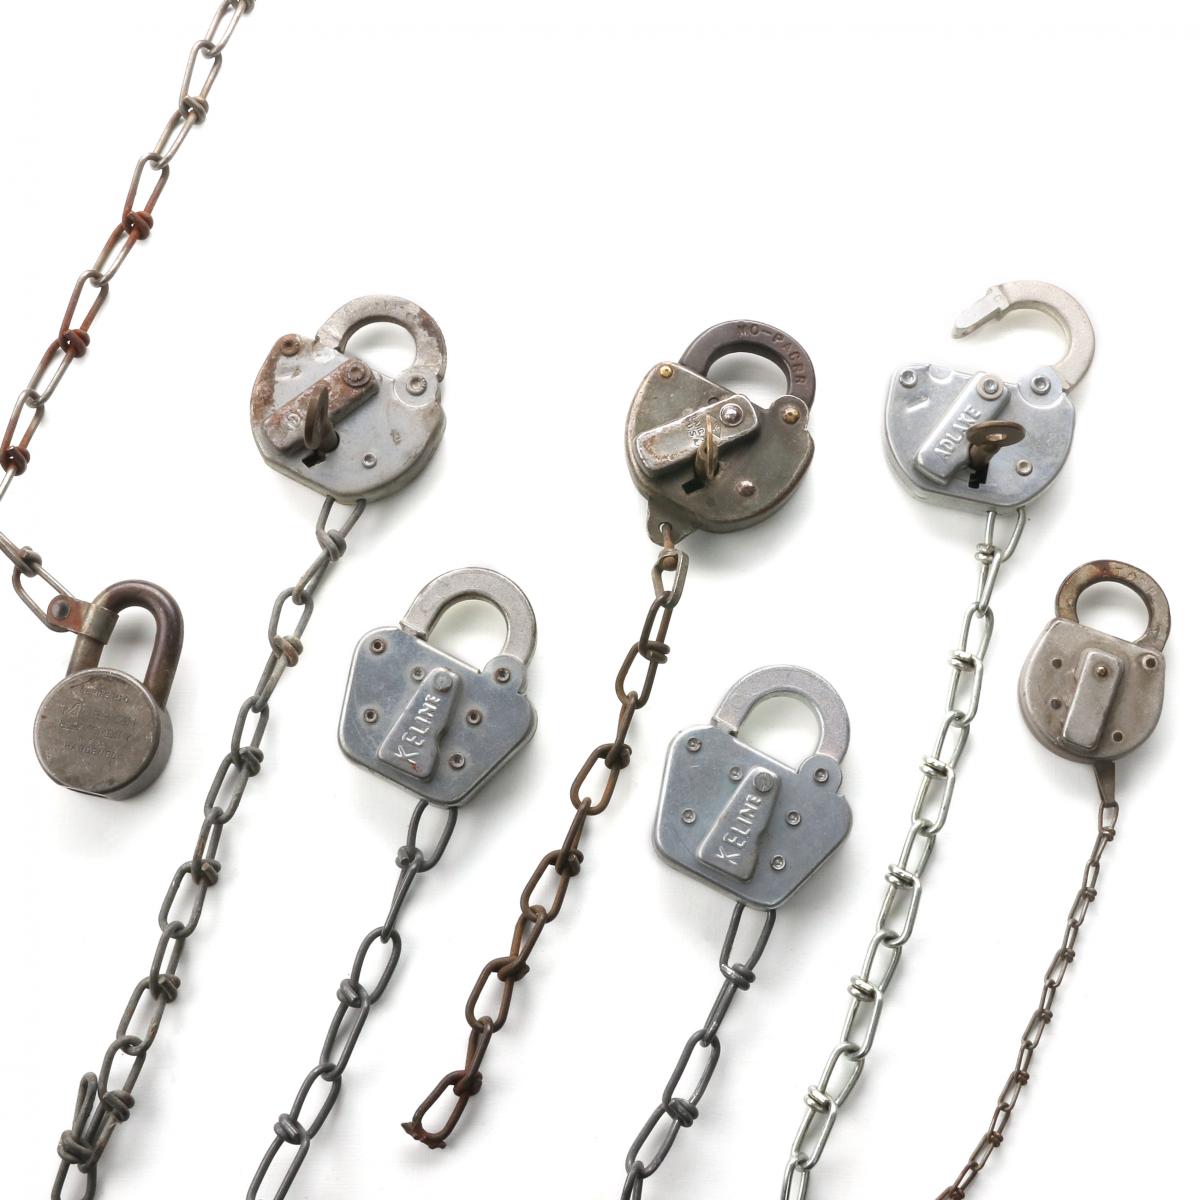 SEVEN PADLOCKS WITH STAMPED MARKINGS OF THREE RAILROADS